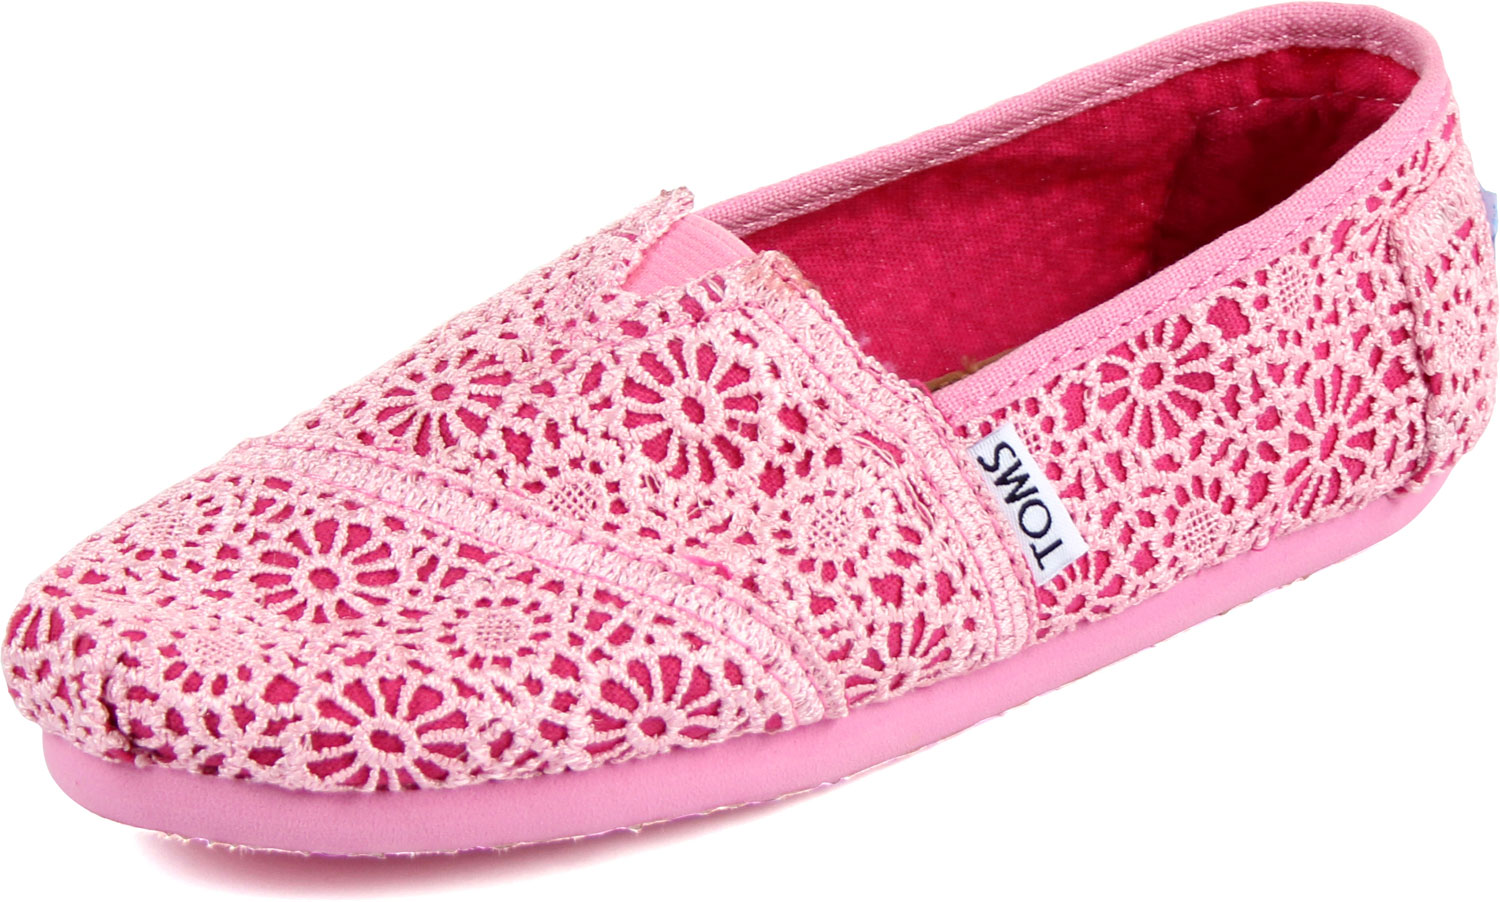 Toms Slip-On Shoes In Pink